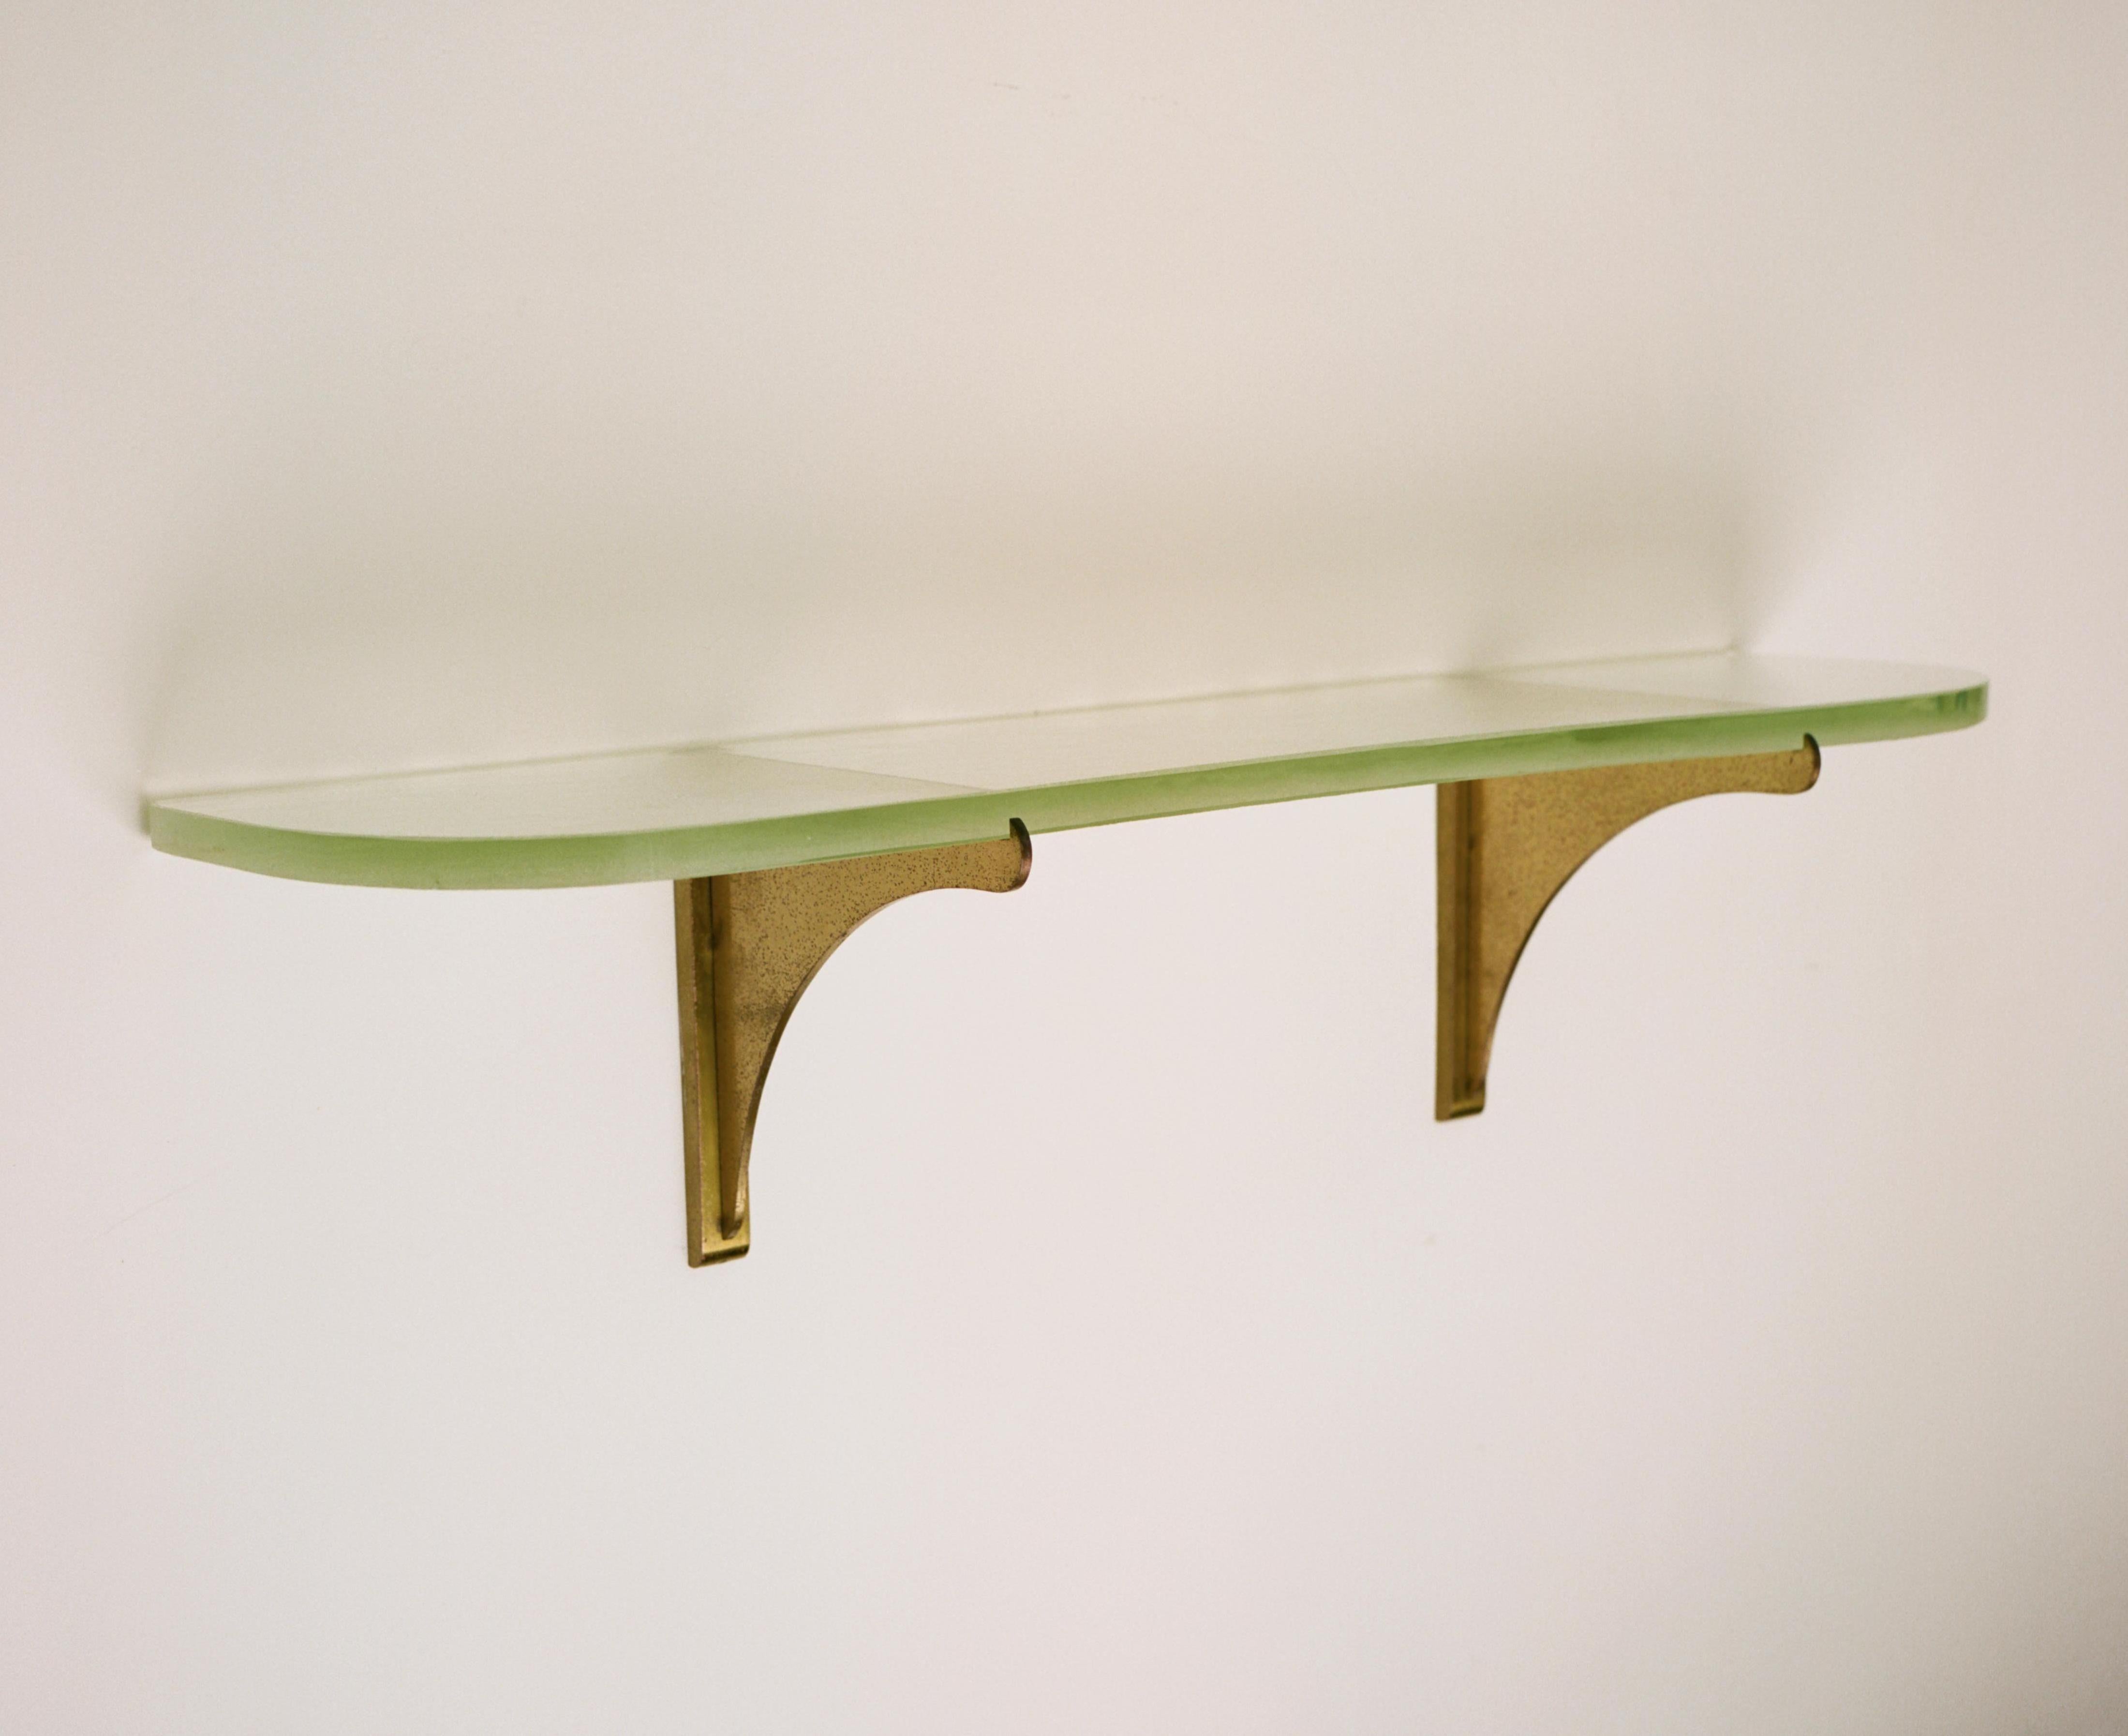 A wall shelf made up of two brushed brass brackets and a curved, heavy piece of sandblasted glass produced by Saint Gobain in France. Jean Perzel was a German-born French glassmaker, goldsmith, and designer who was a key figure in the early 20th